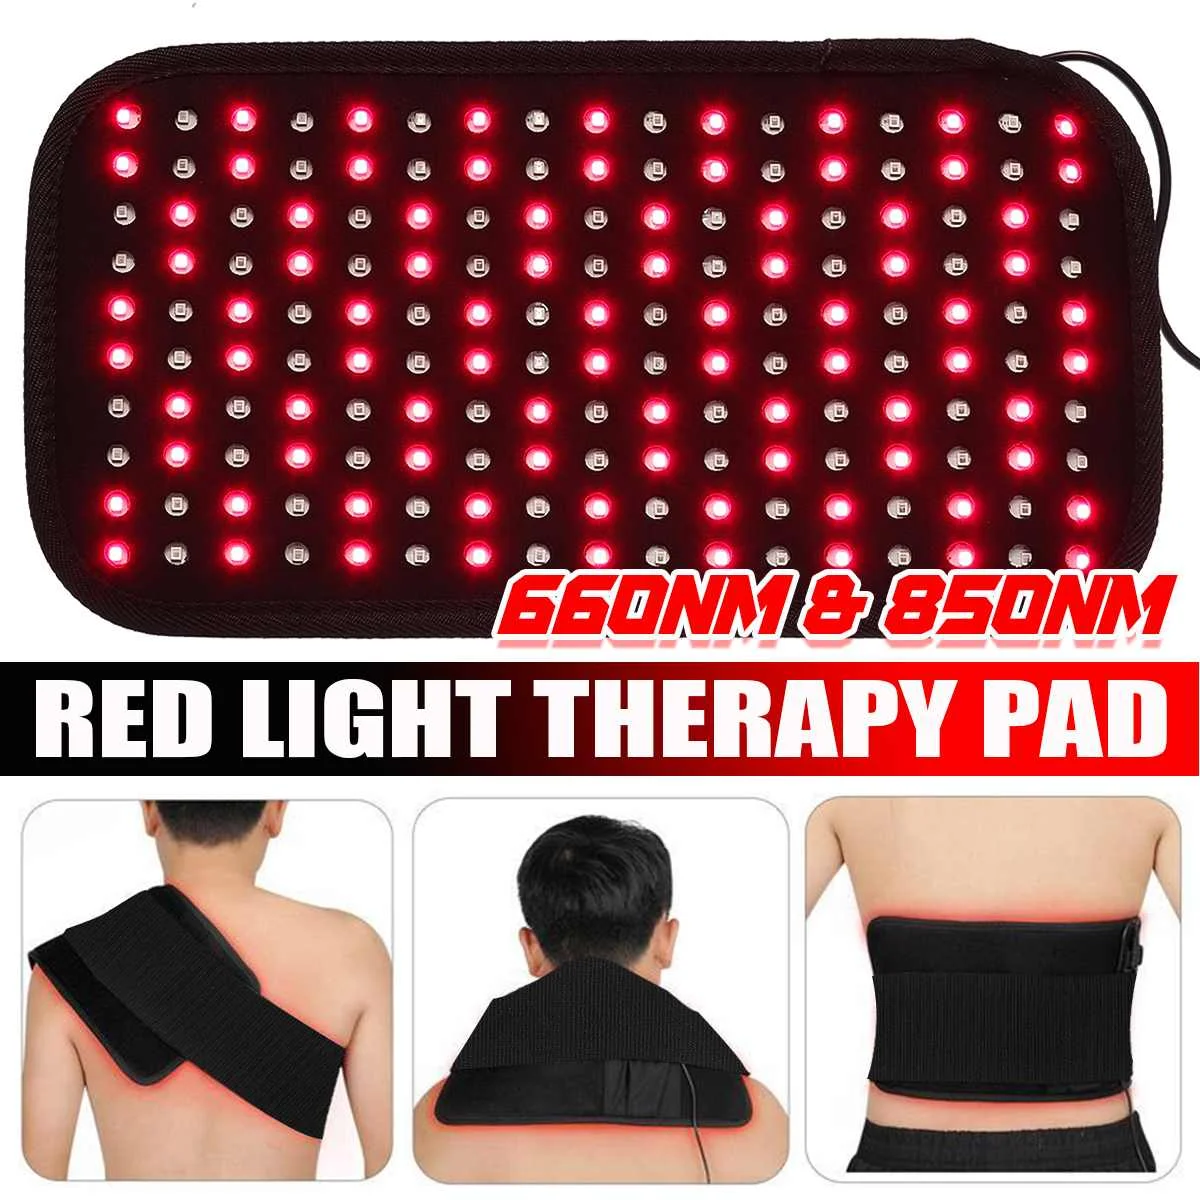 660nm 850nm LED Red Light Therapy Near Infrared Light Therapy Devices Large Pads Wearable Wrap for Pain Relief at Home